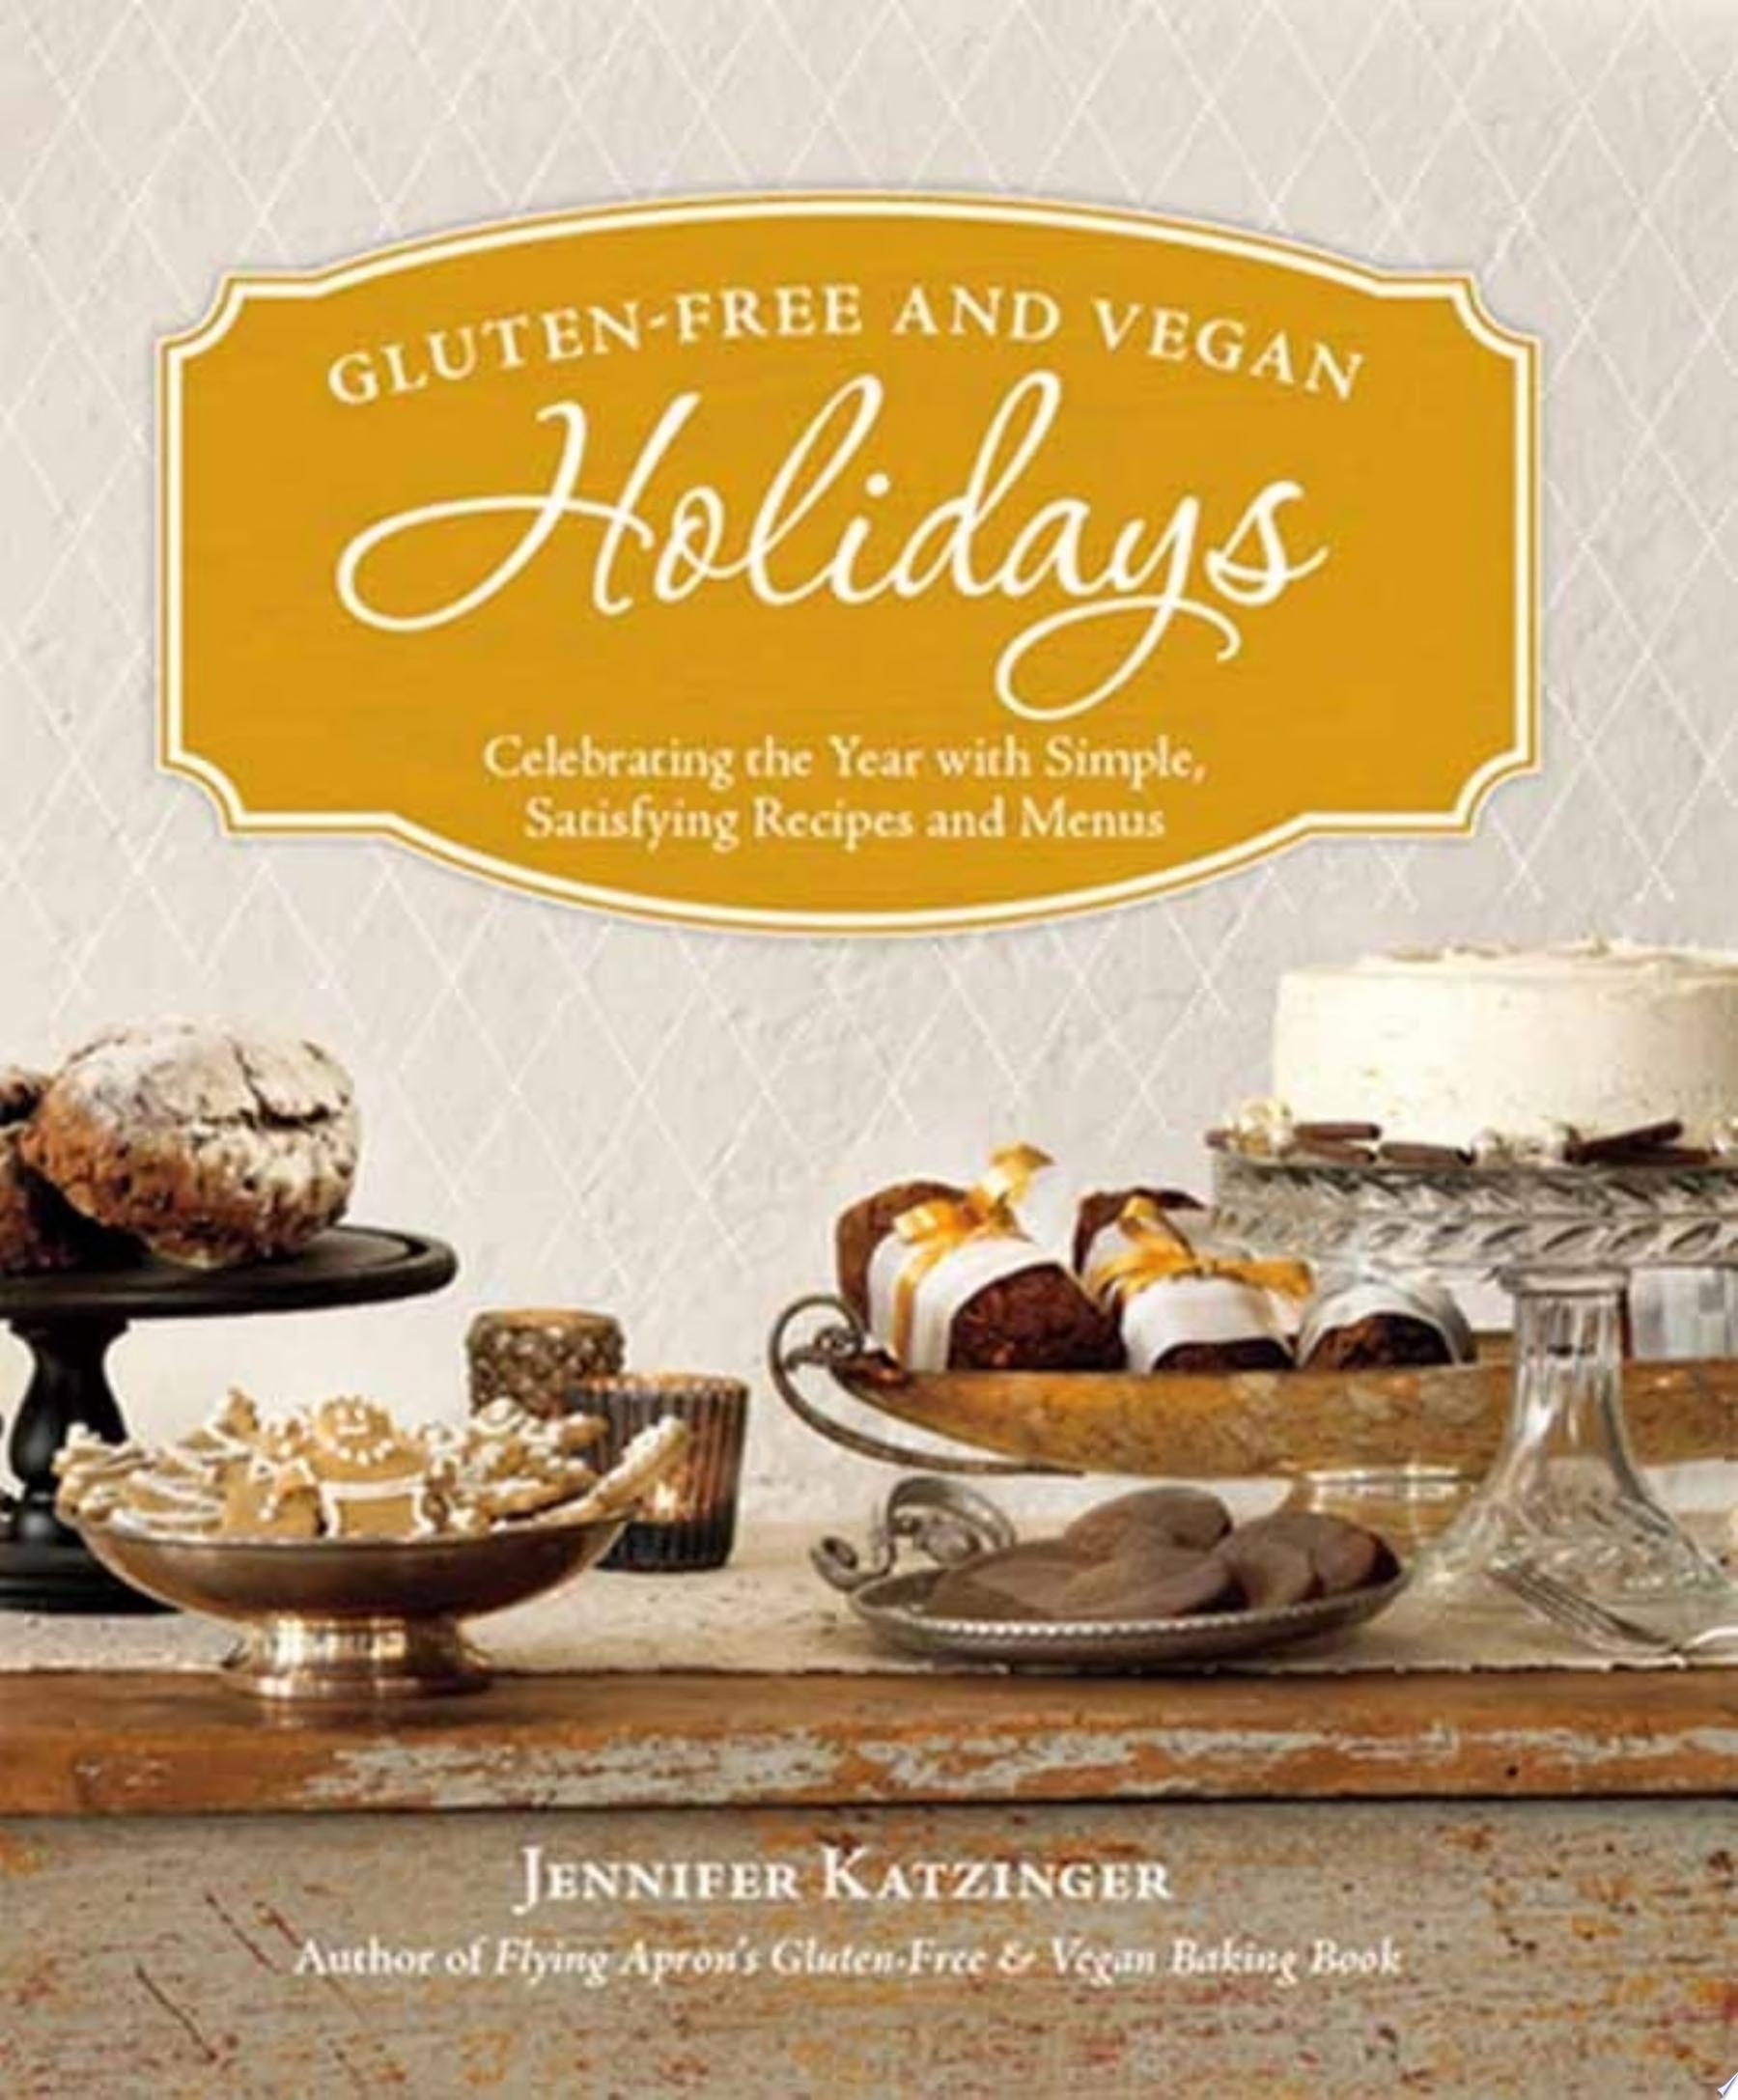 Image for "Gluten-Free and Vegan Holidays"